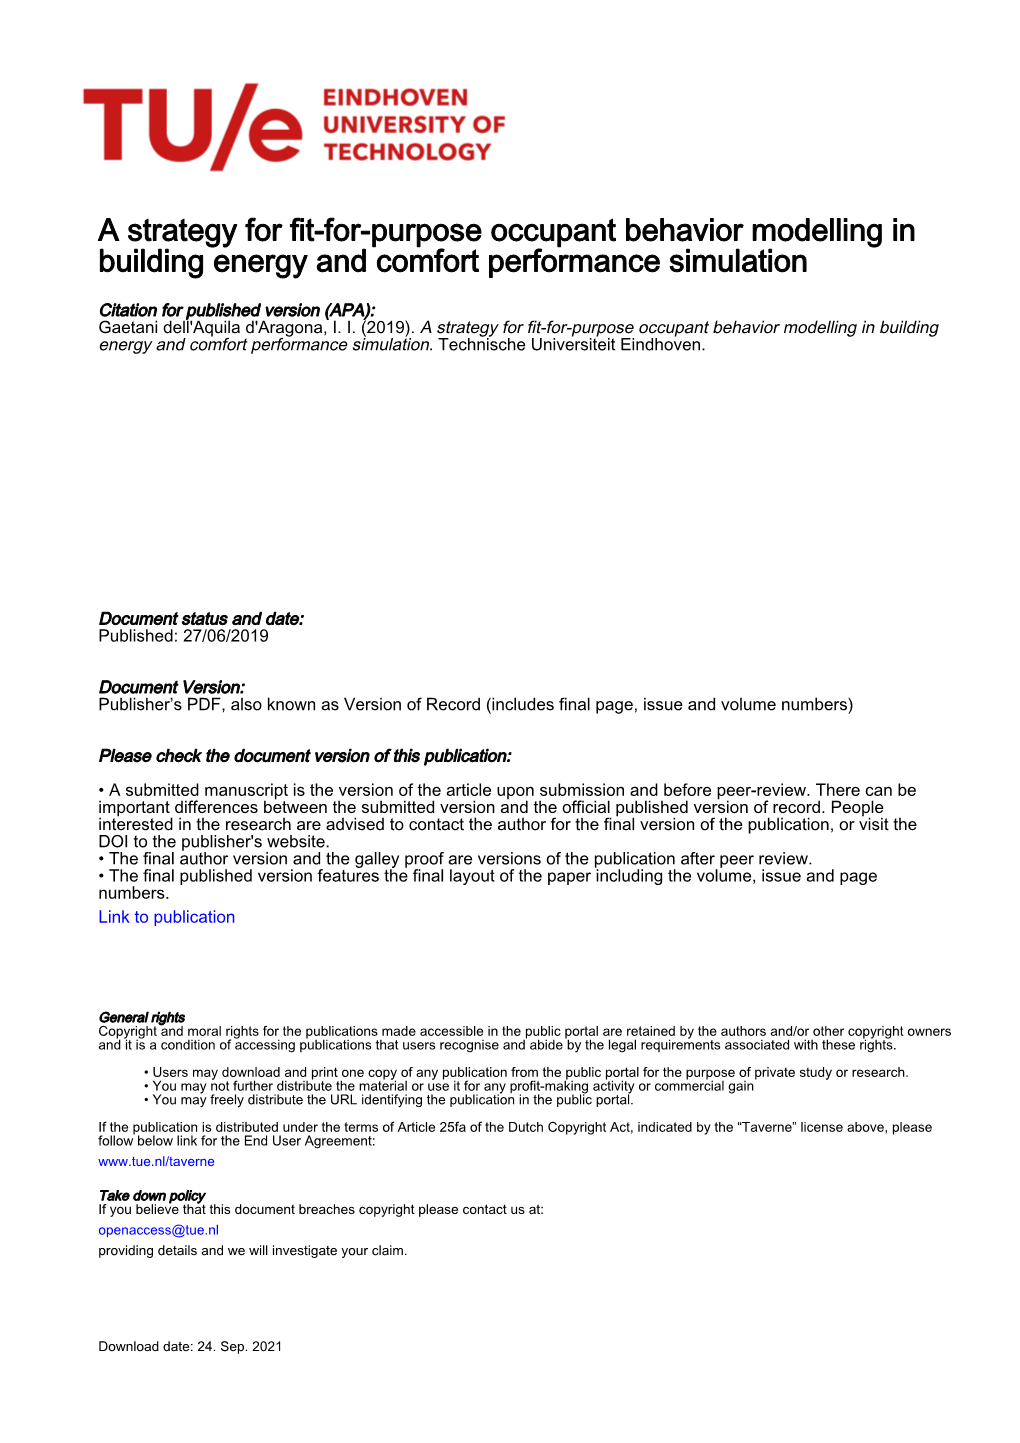 A Strategy for Fit-For-Purpose Occupant Behavior Modelling in Building Energy and Comfort Performance Simulation